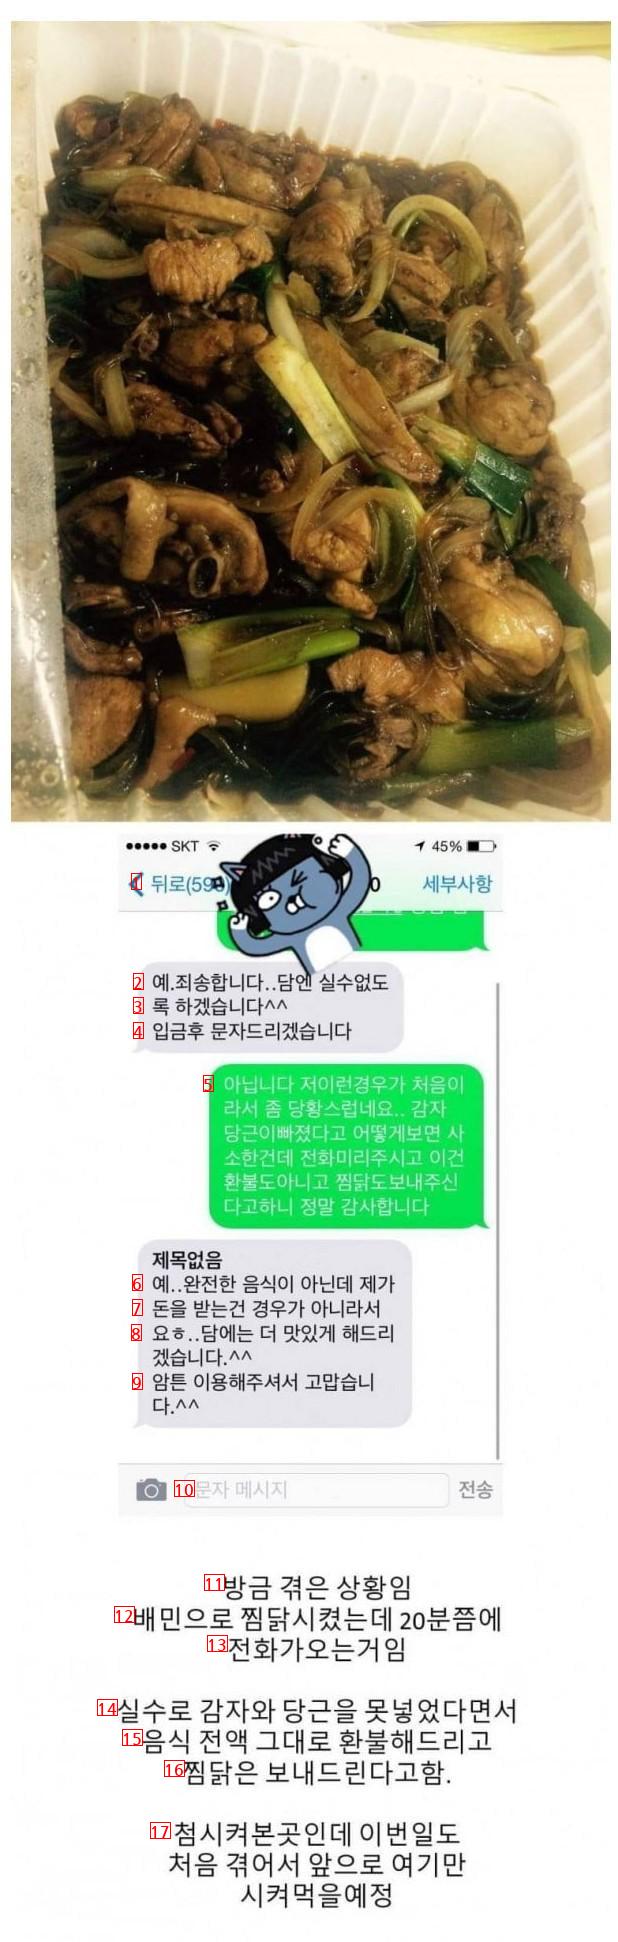 Delivery restaurant owner's personality is legendary.jpg